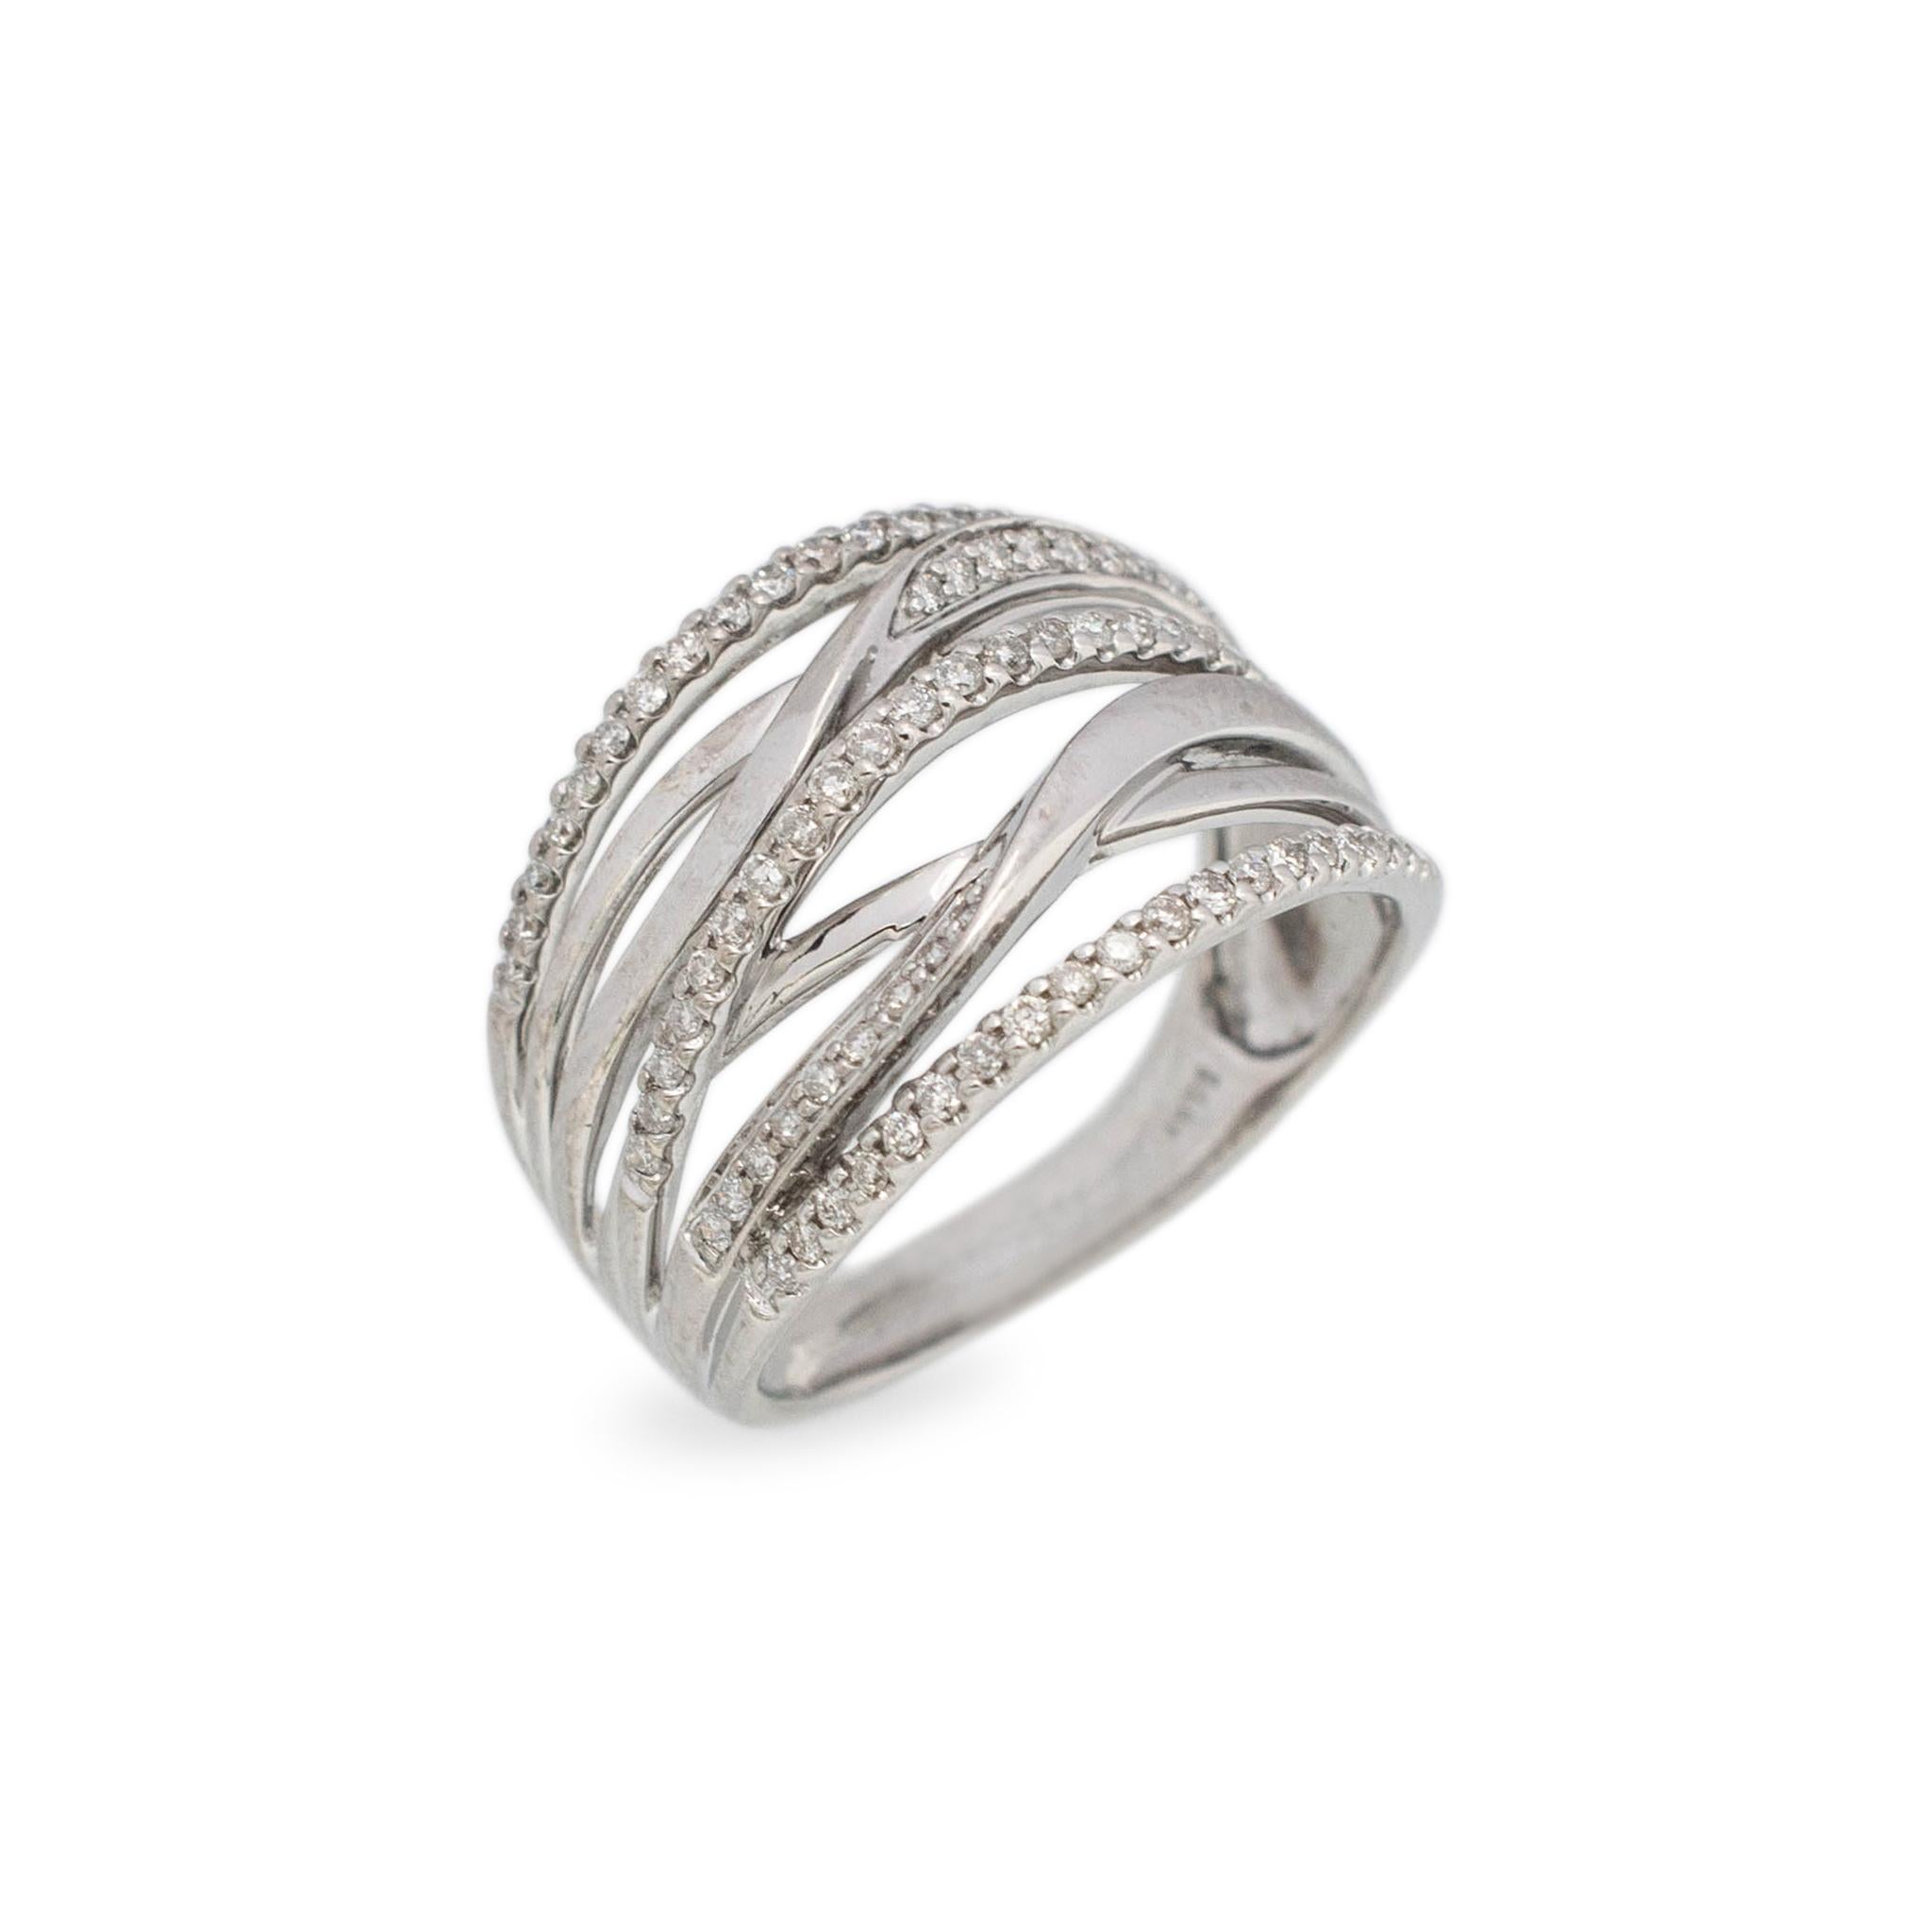 

Gender: Ladies

Material: 14K White Gold

Size: 8.5

Width: 15.30 mm tapering to 3.15 mm

Weight: 5.30Grams

Ladies 14K white gold diamond cocktail ring with a tapered, comfort-fit shank. Engraved with 